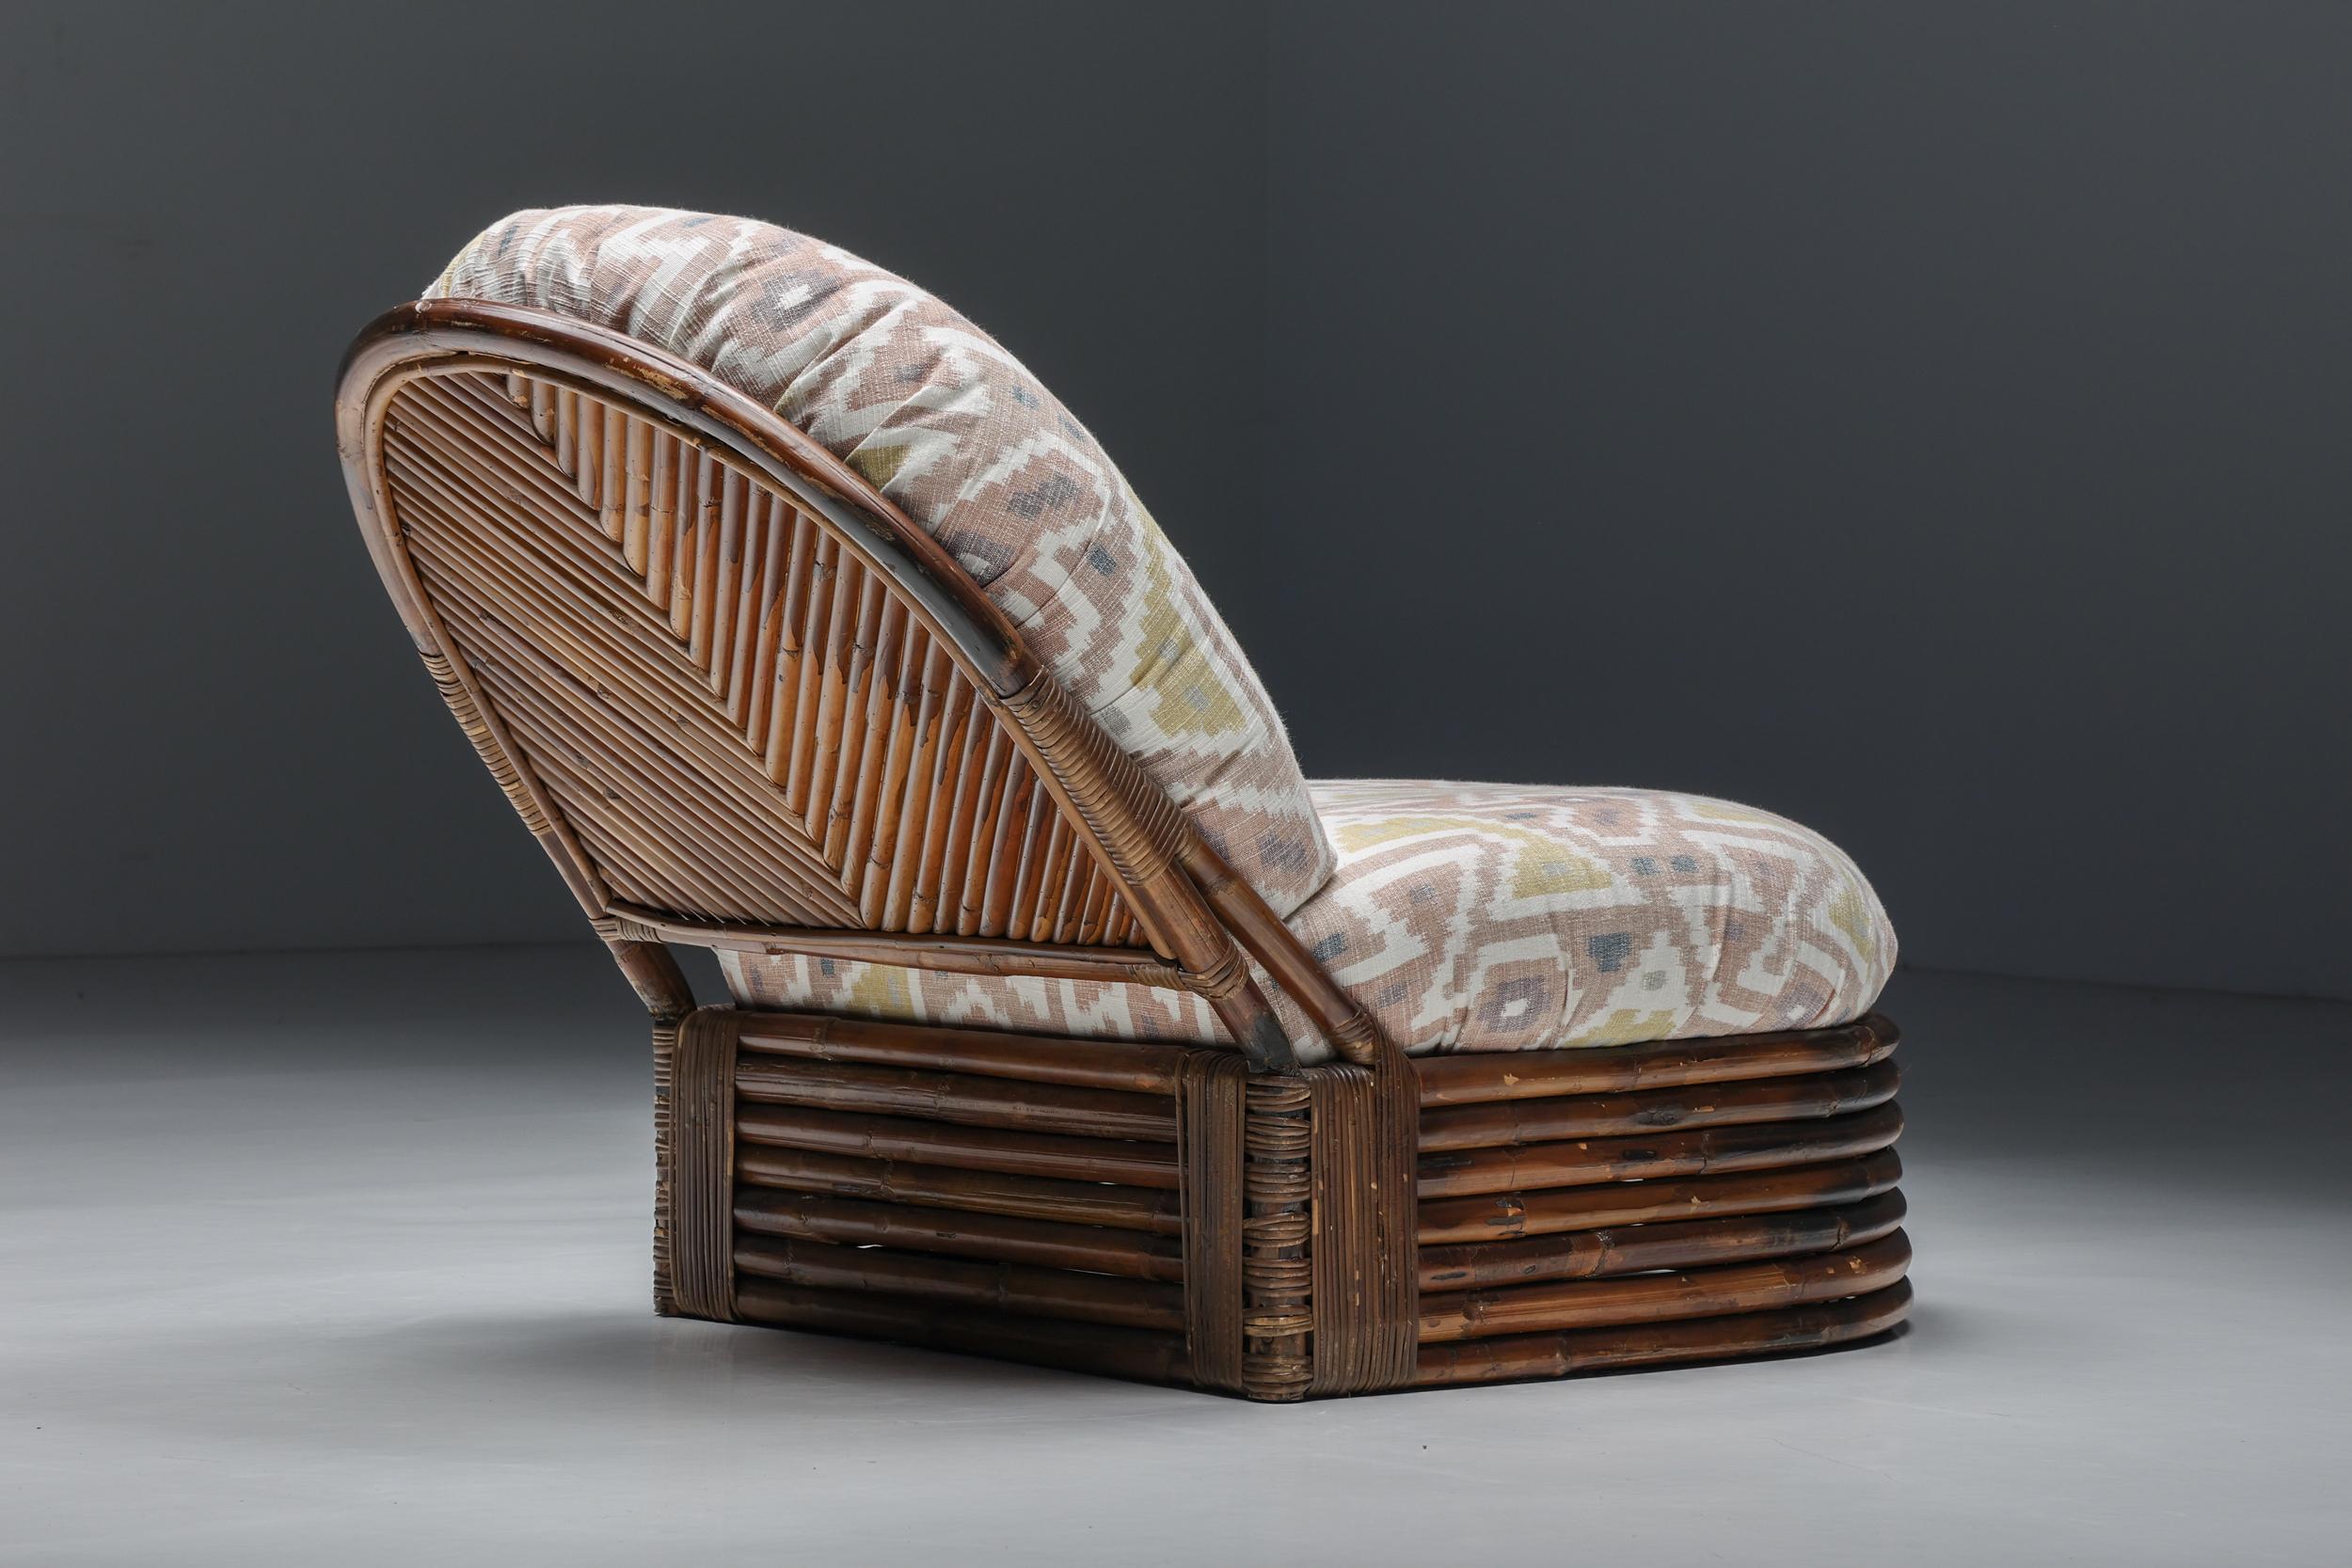 Cotton Vivai Del Sud Bamboo Lounge Chairs, Pierre Frey Jacquard, 1970s For Sale